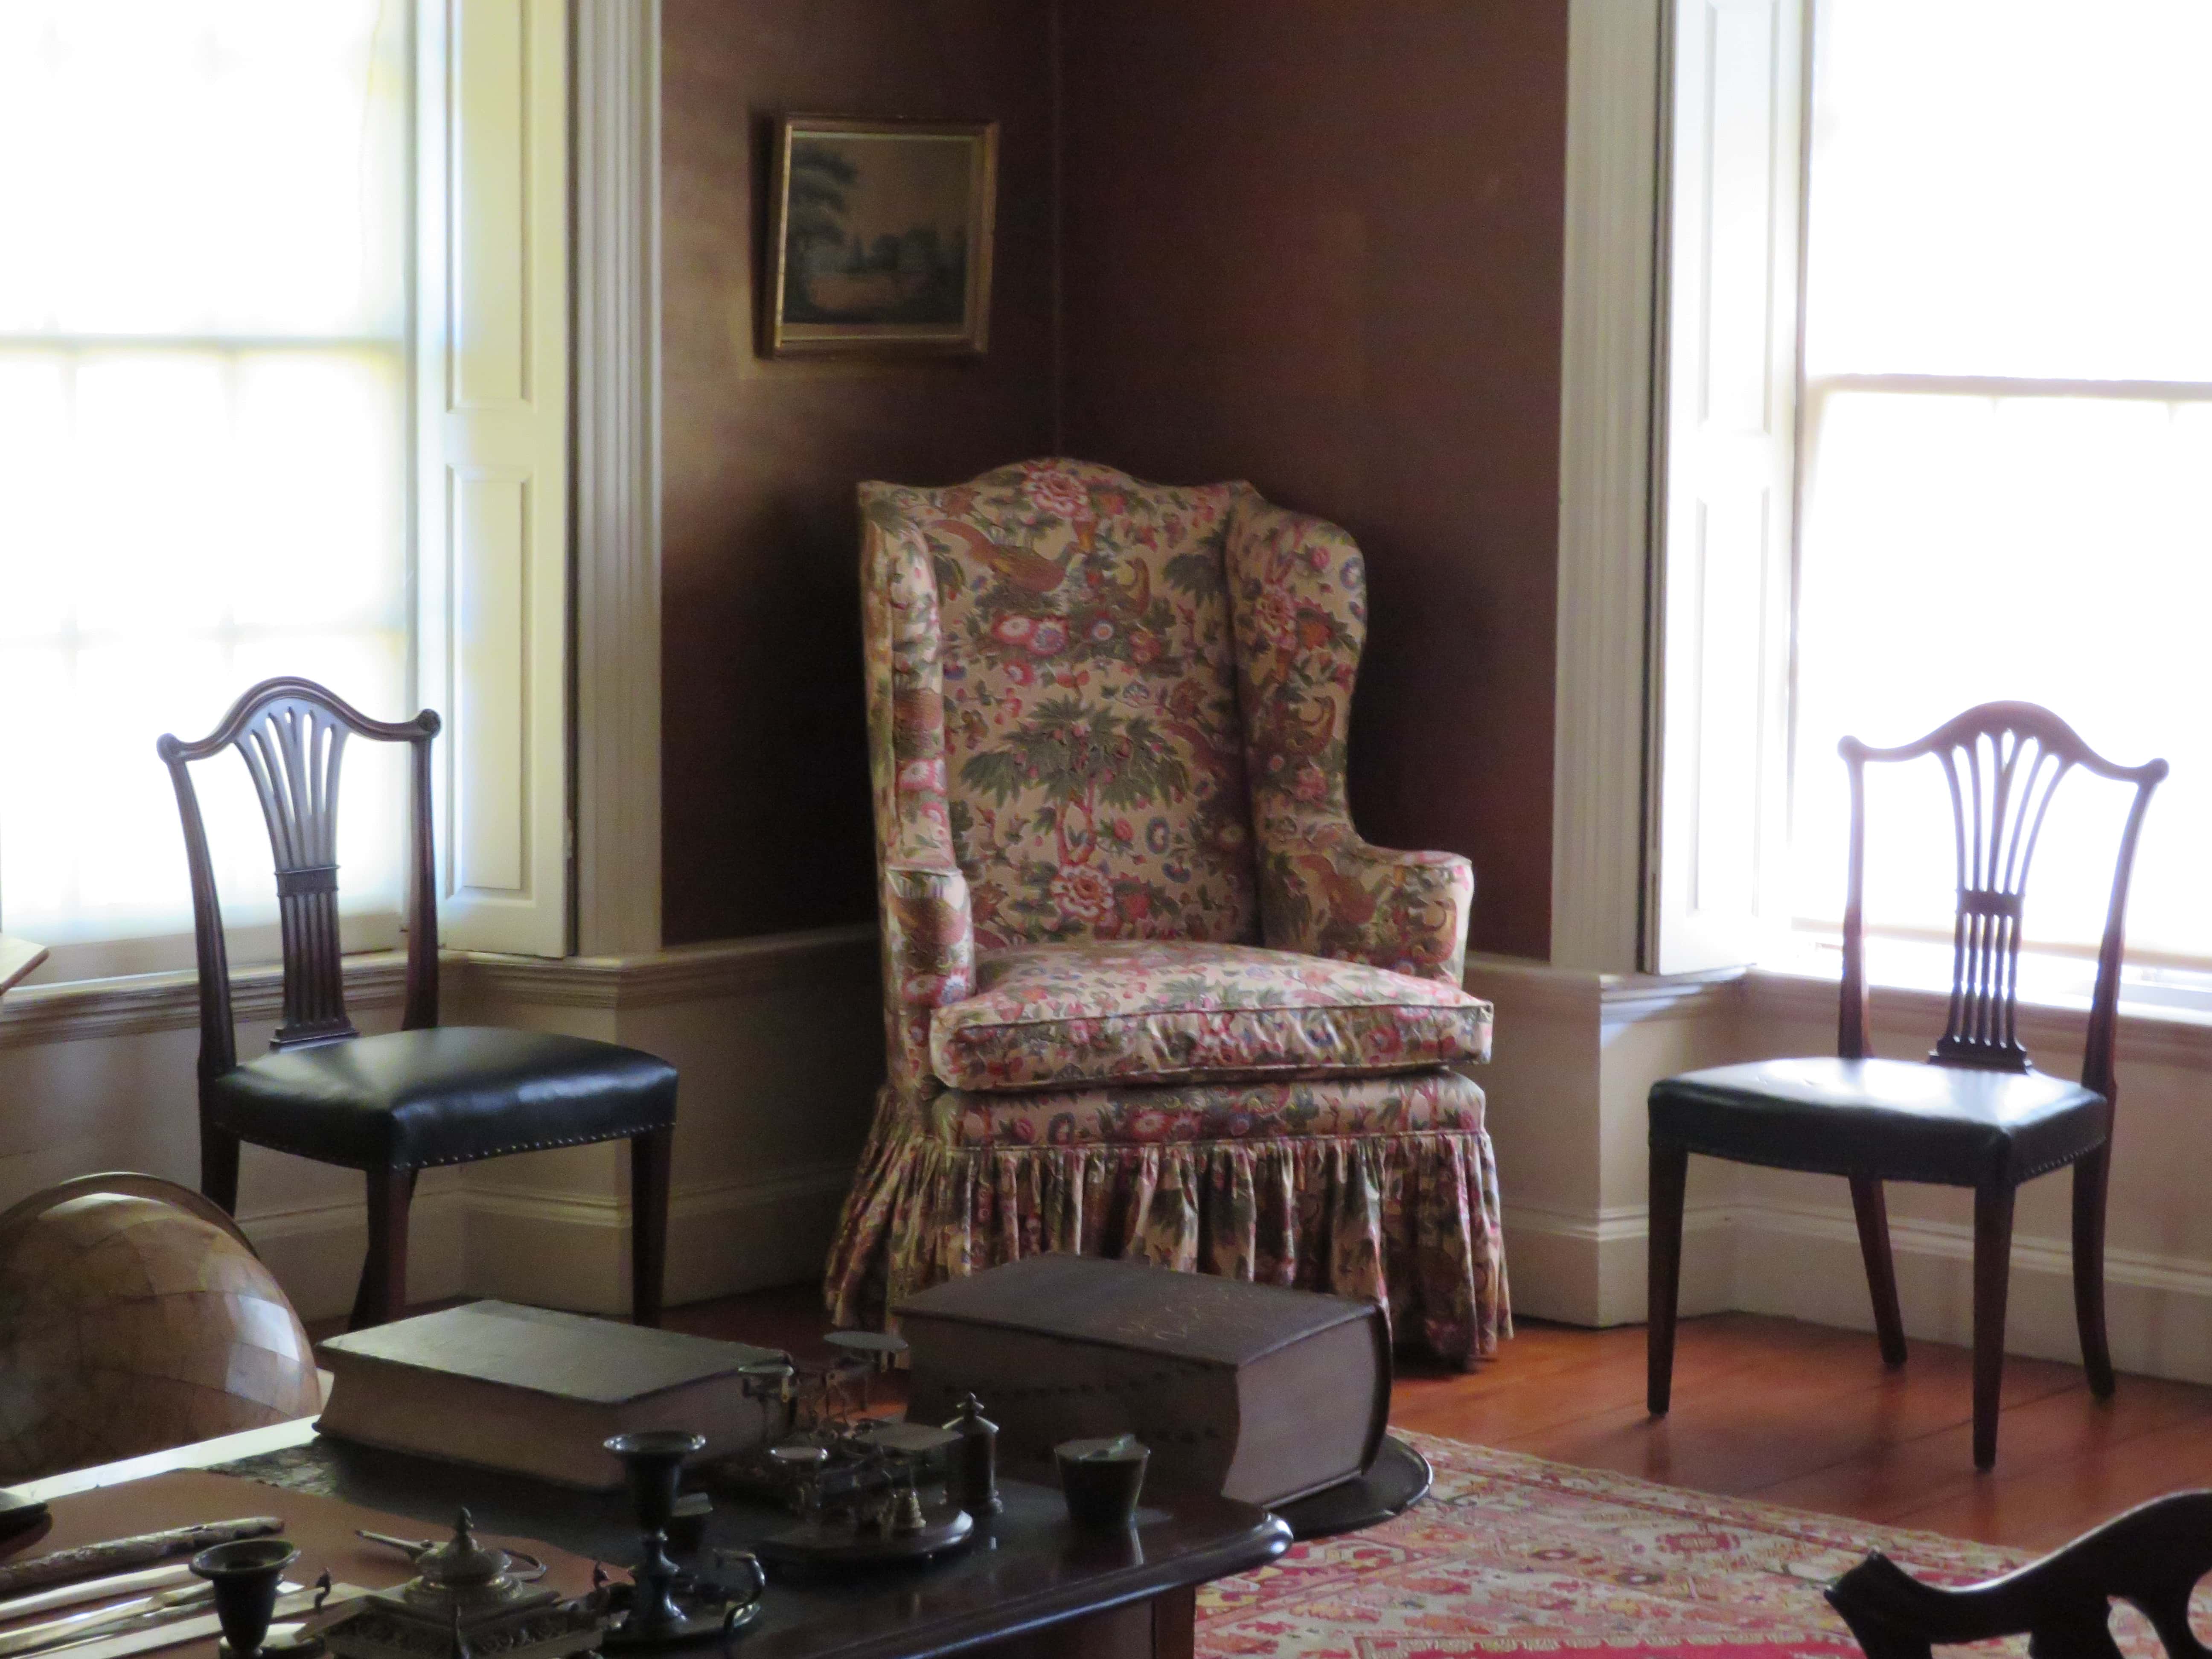 The Old House - Room where John Adams died - Chair he had stroke watch parade- Quincy, MA